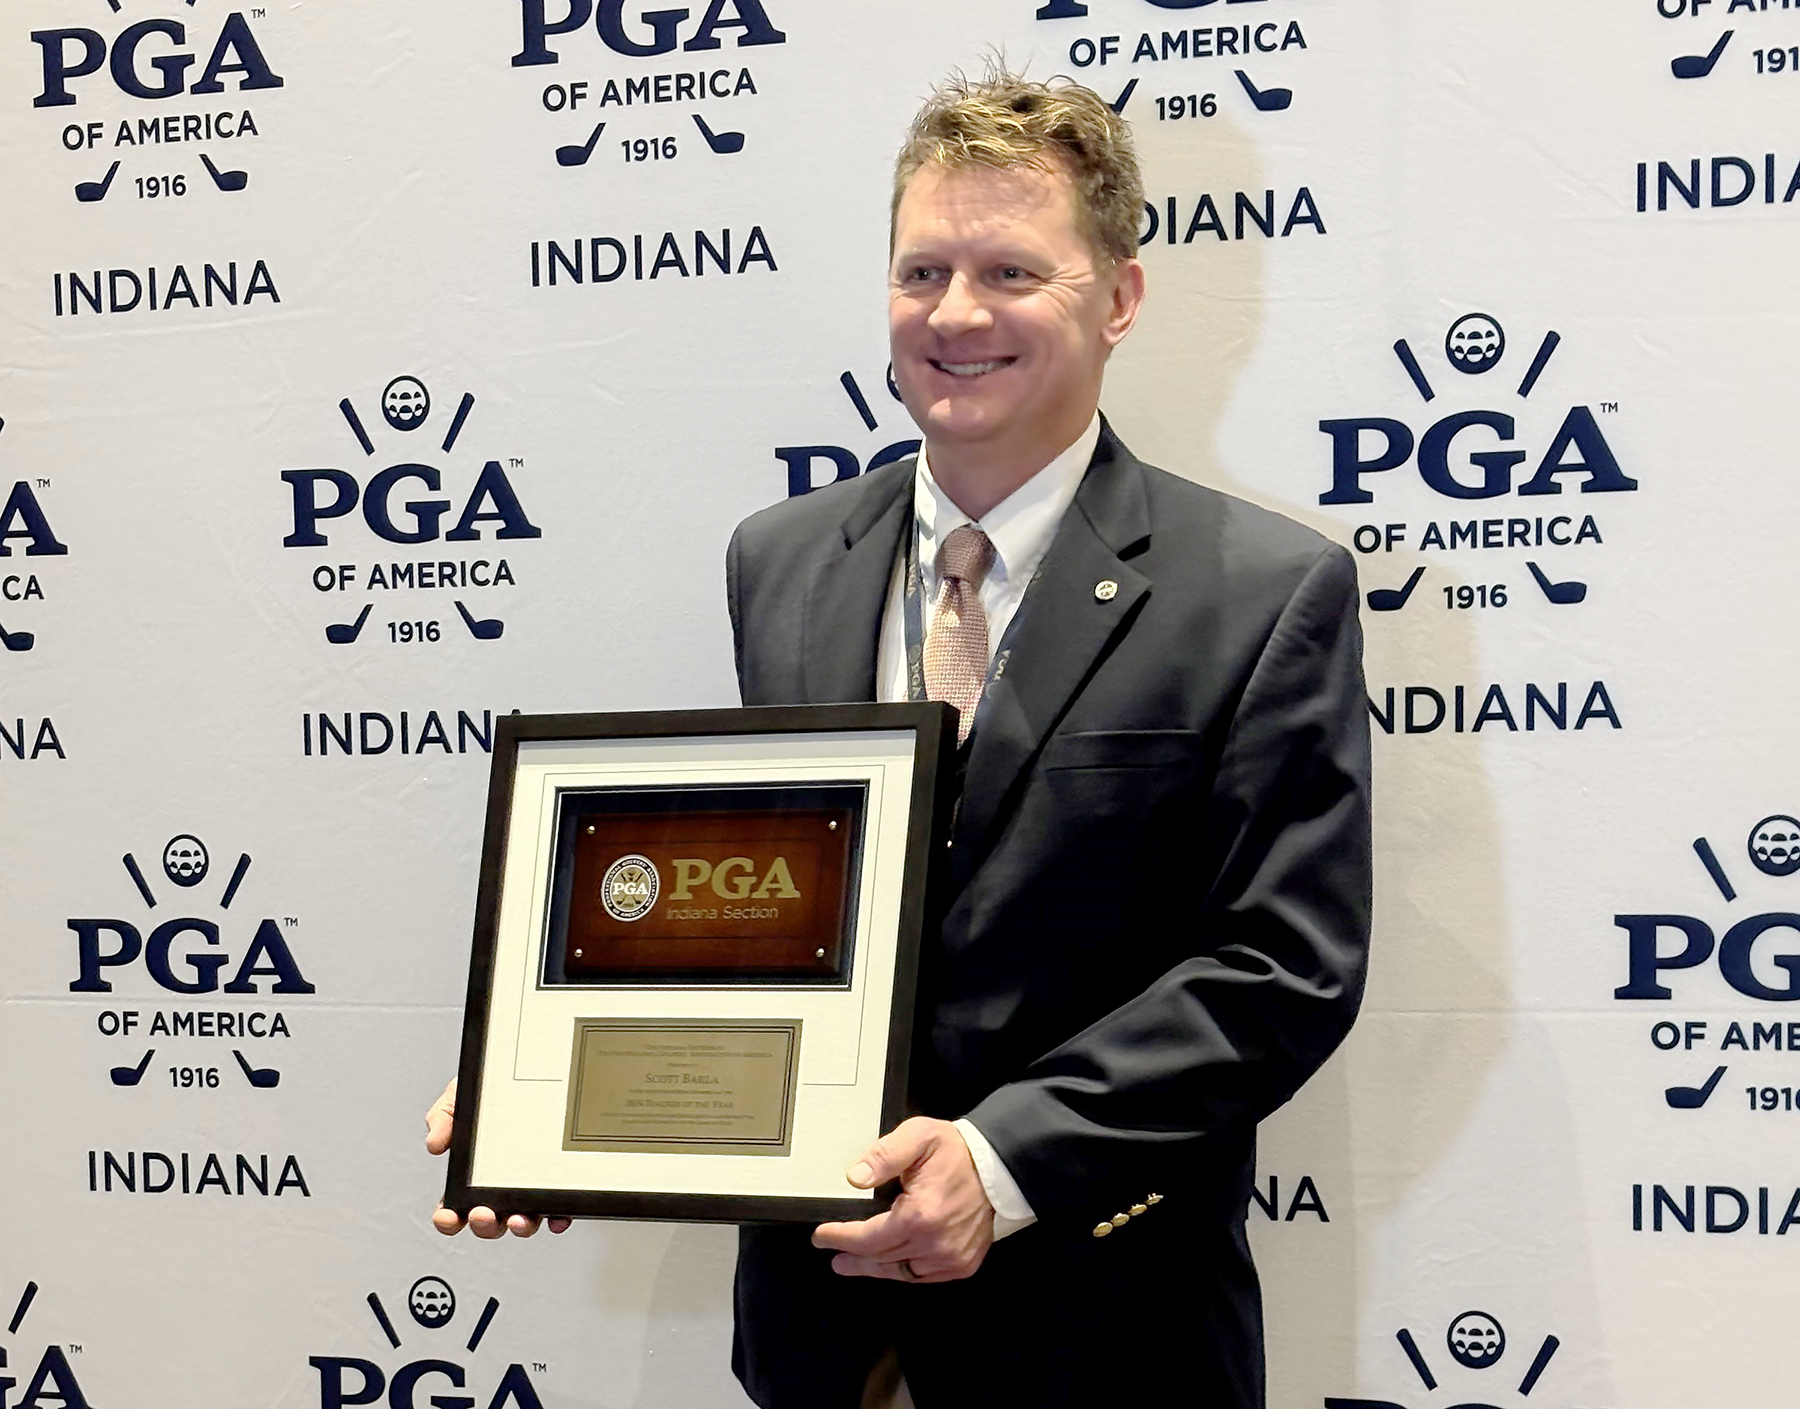 Professional Golf Management Alumnus Barla’s Teaching Advances, Community Initiatives Lauded By Indiana PGA Section, Fellow Alum Lundy Given Tribute 